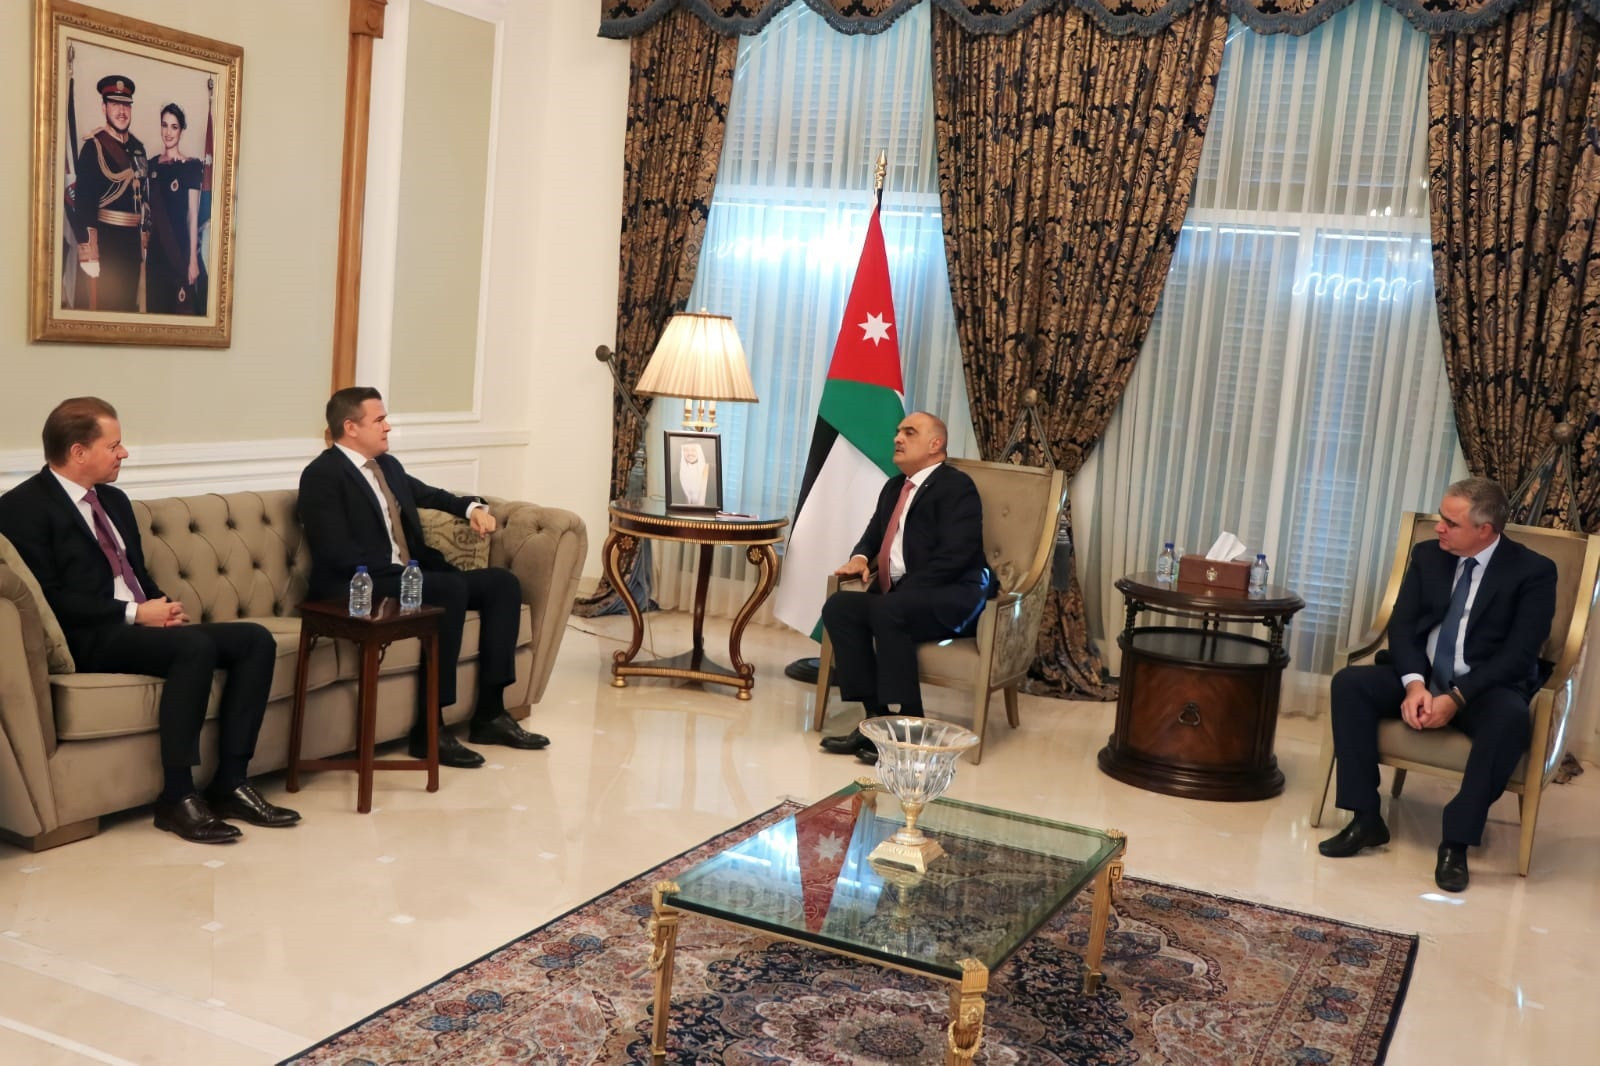 WADA President Witold Bańka, second from left, and director general Olivier Niggli, left, meet Jordanian Prime Minister Bisher Al-Khasawneh, second from right ©Prime Ministry of Jordan